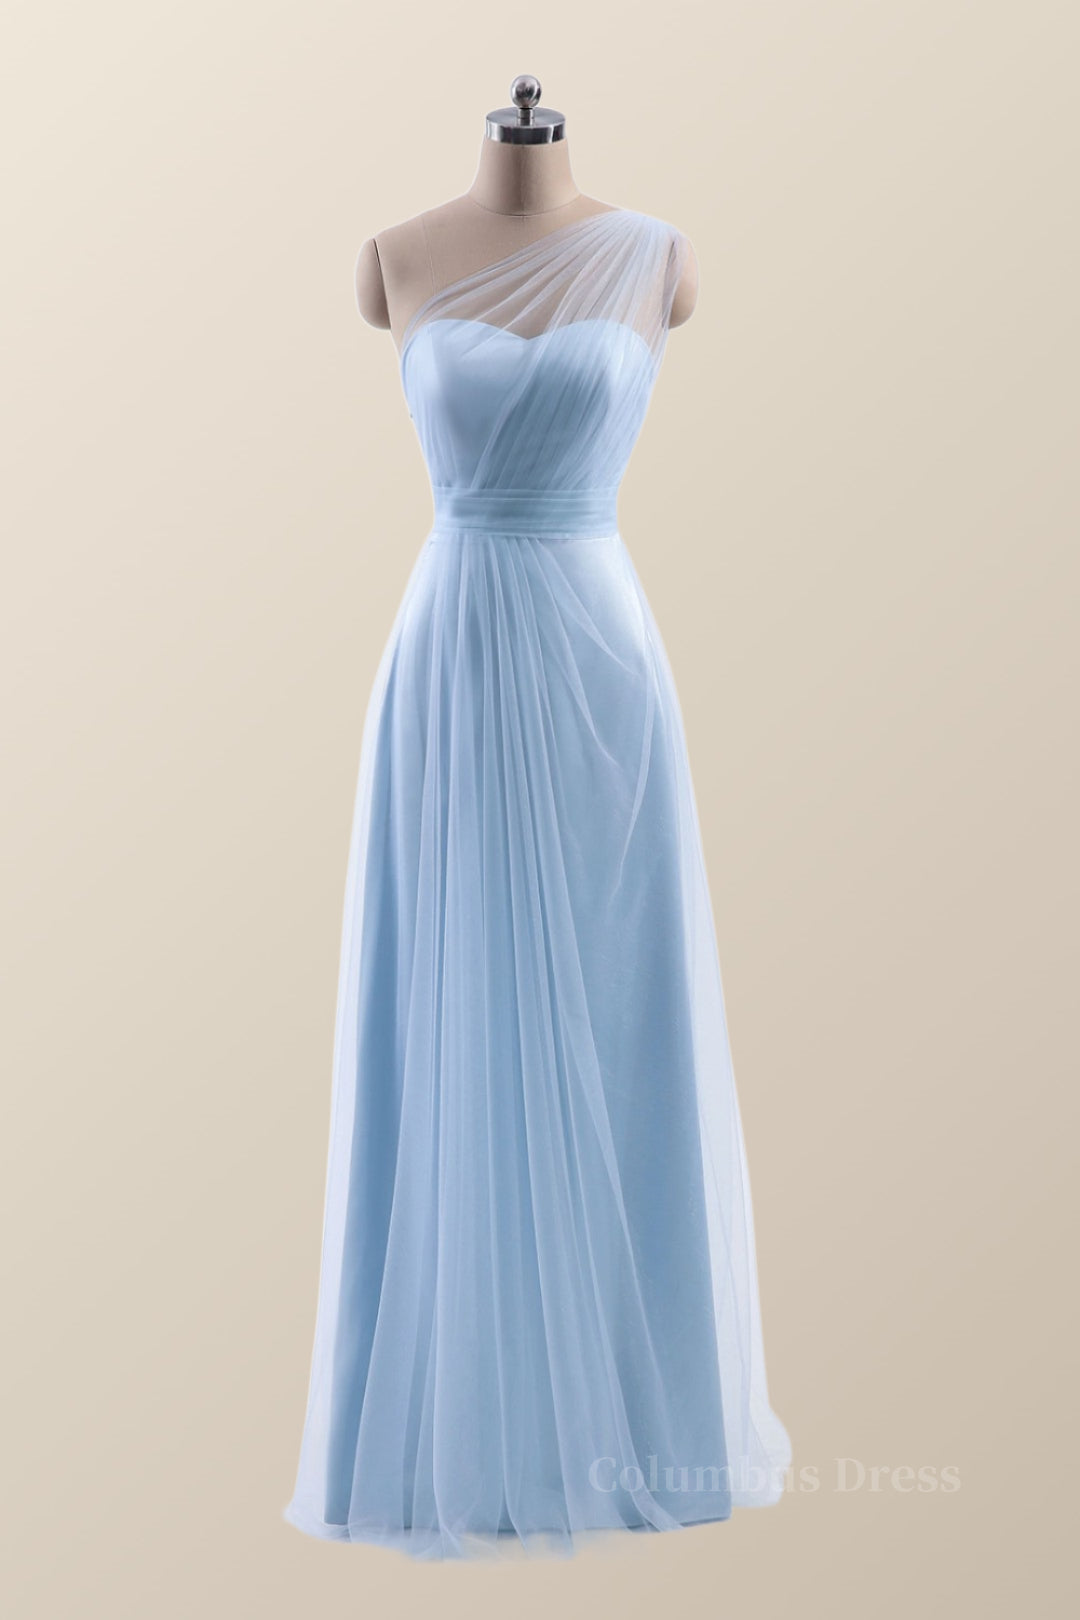 Party Dress Hair Style, One Shoulder Light Blue Tulle A-line Bridesmaid Dress